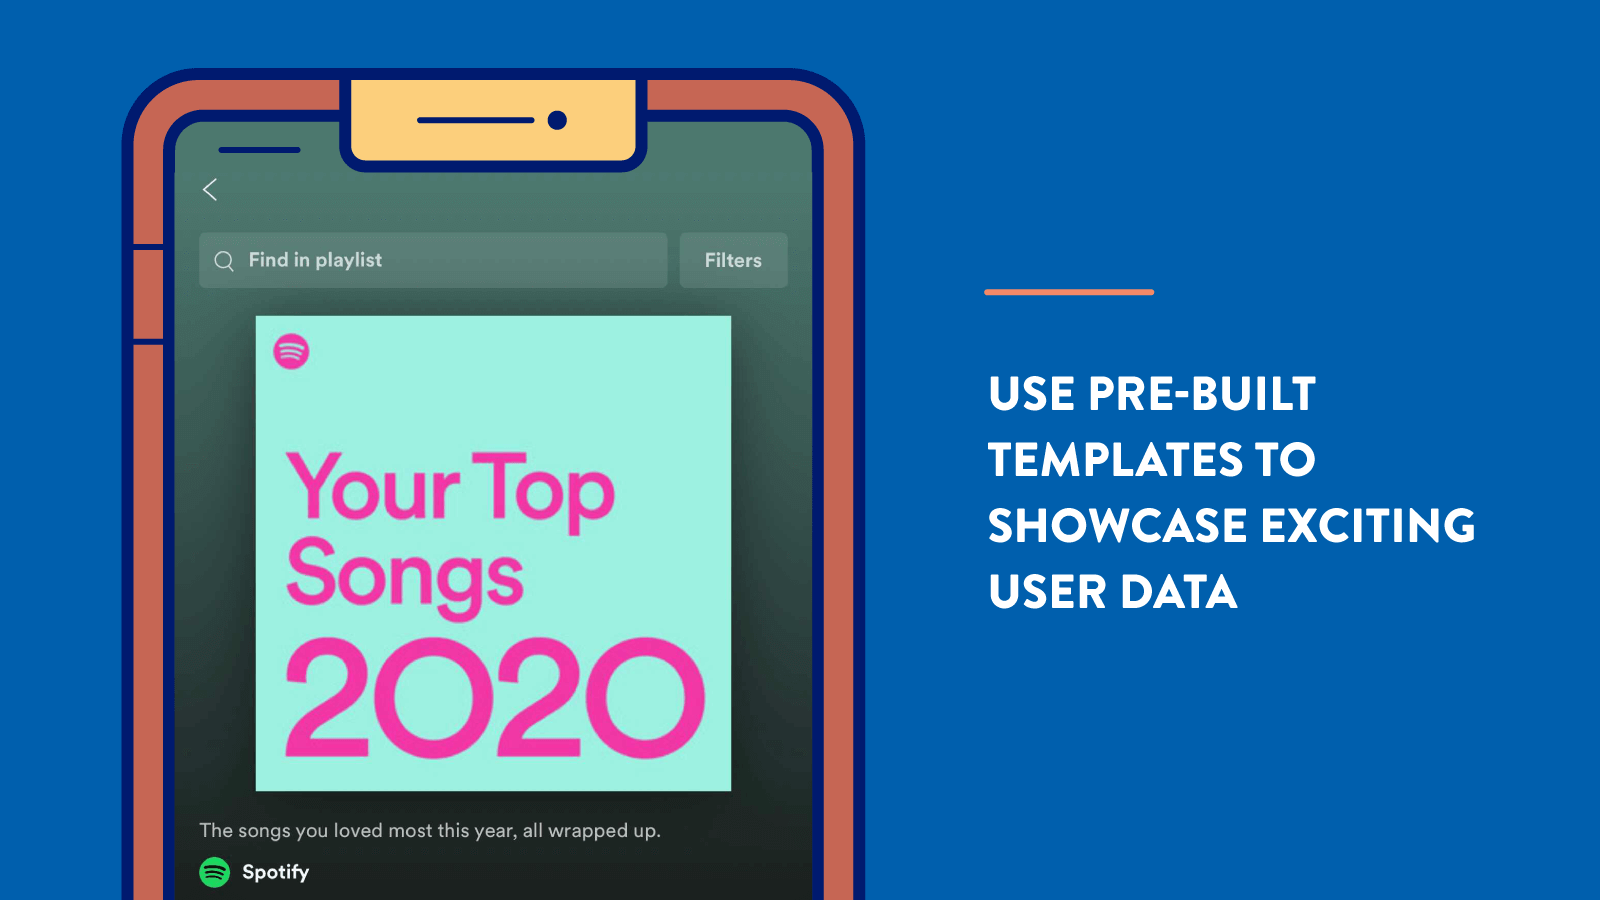 Personalization tip: Use Pre-Built Templates to Showcase Exciting User Data